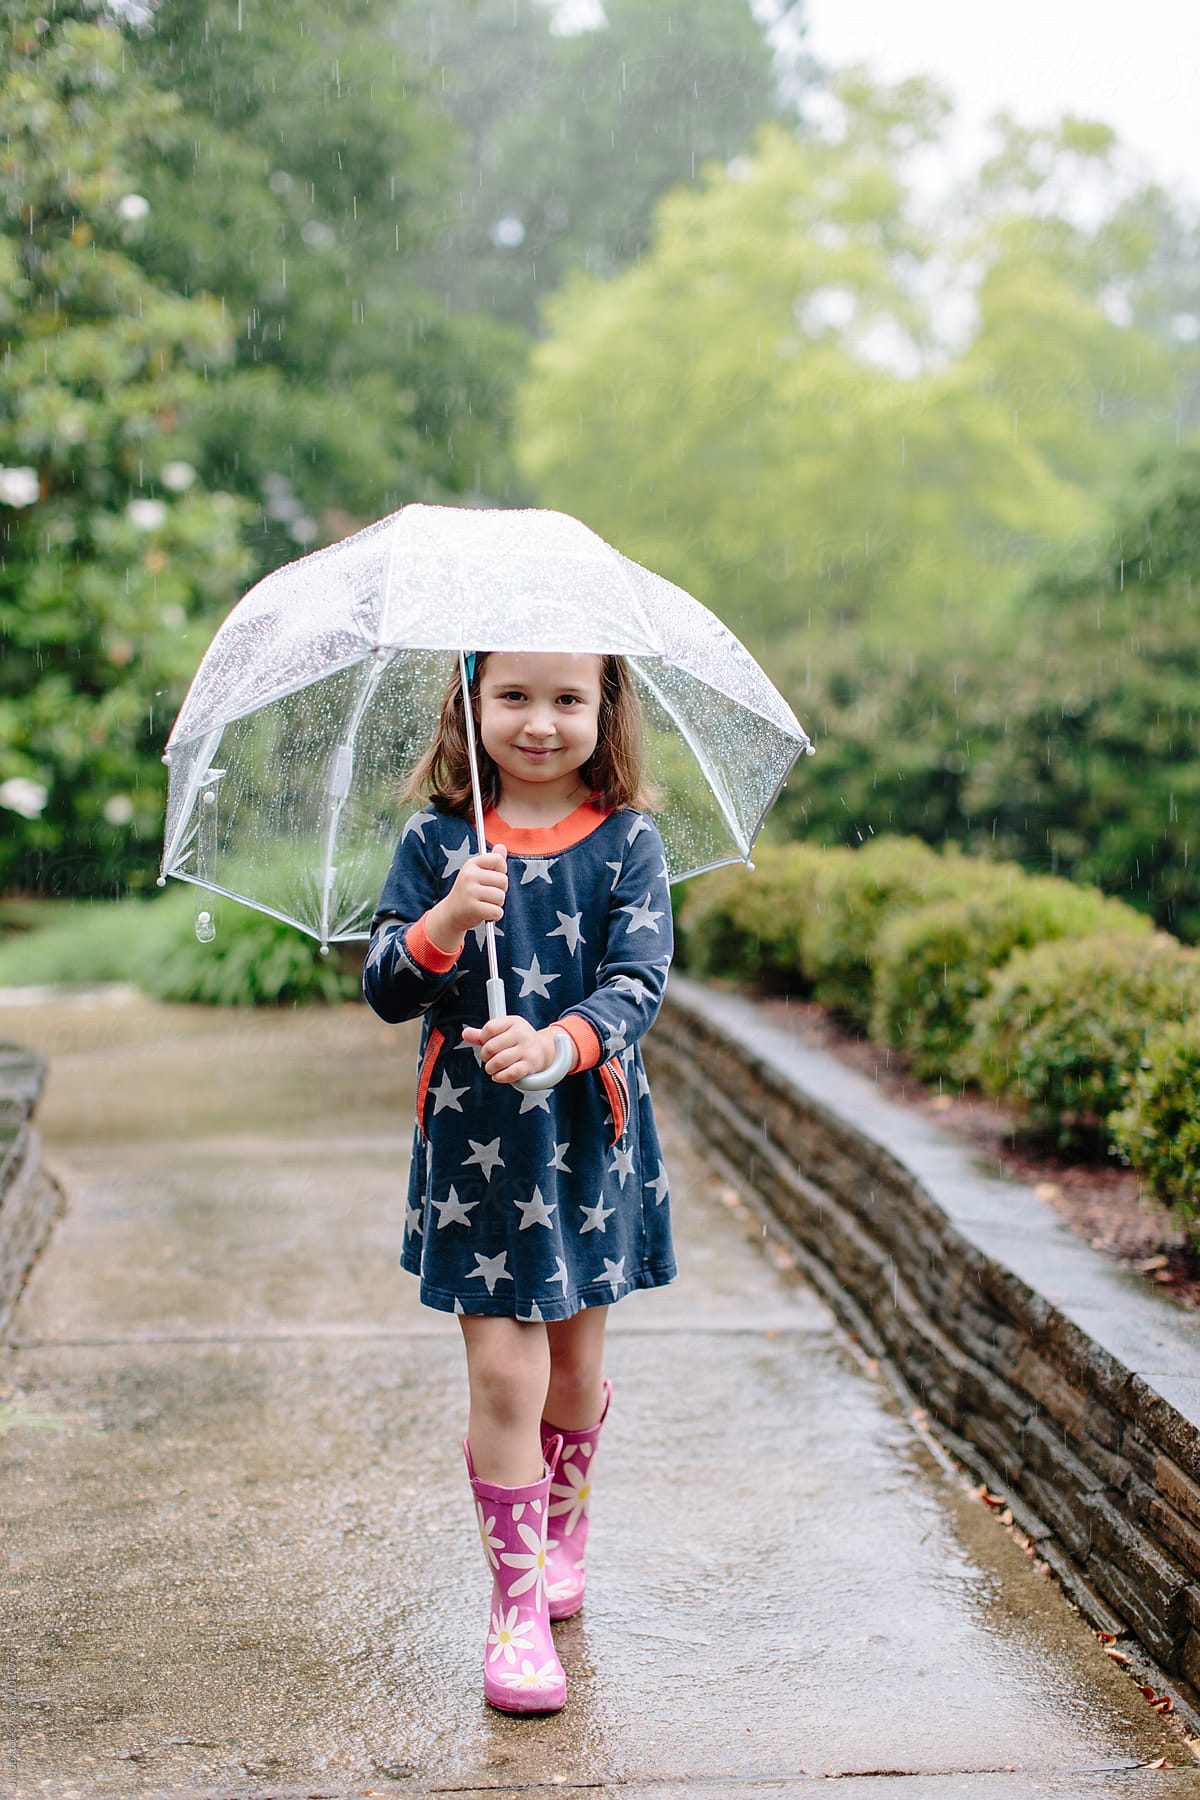 Cute Young Girl Walking In The Rain With An Umbrella By Stocksy 